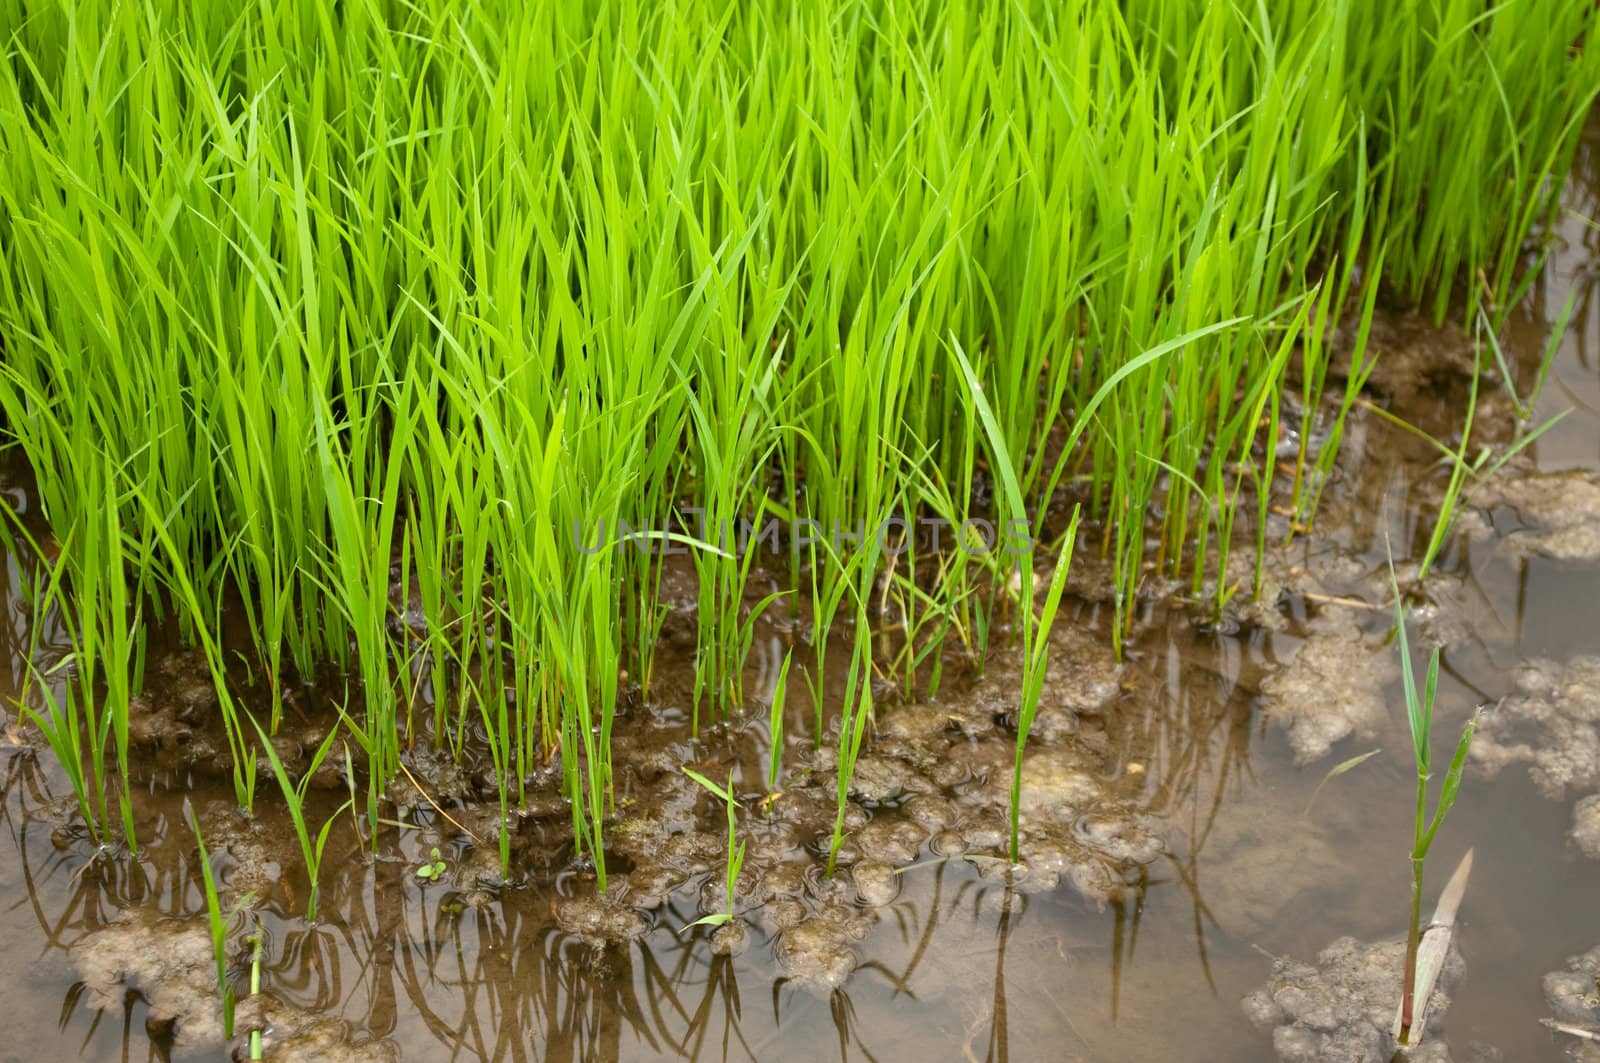 A small patch of rice field in the Philippines